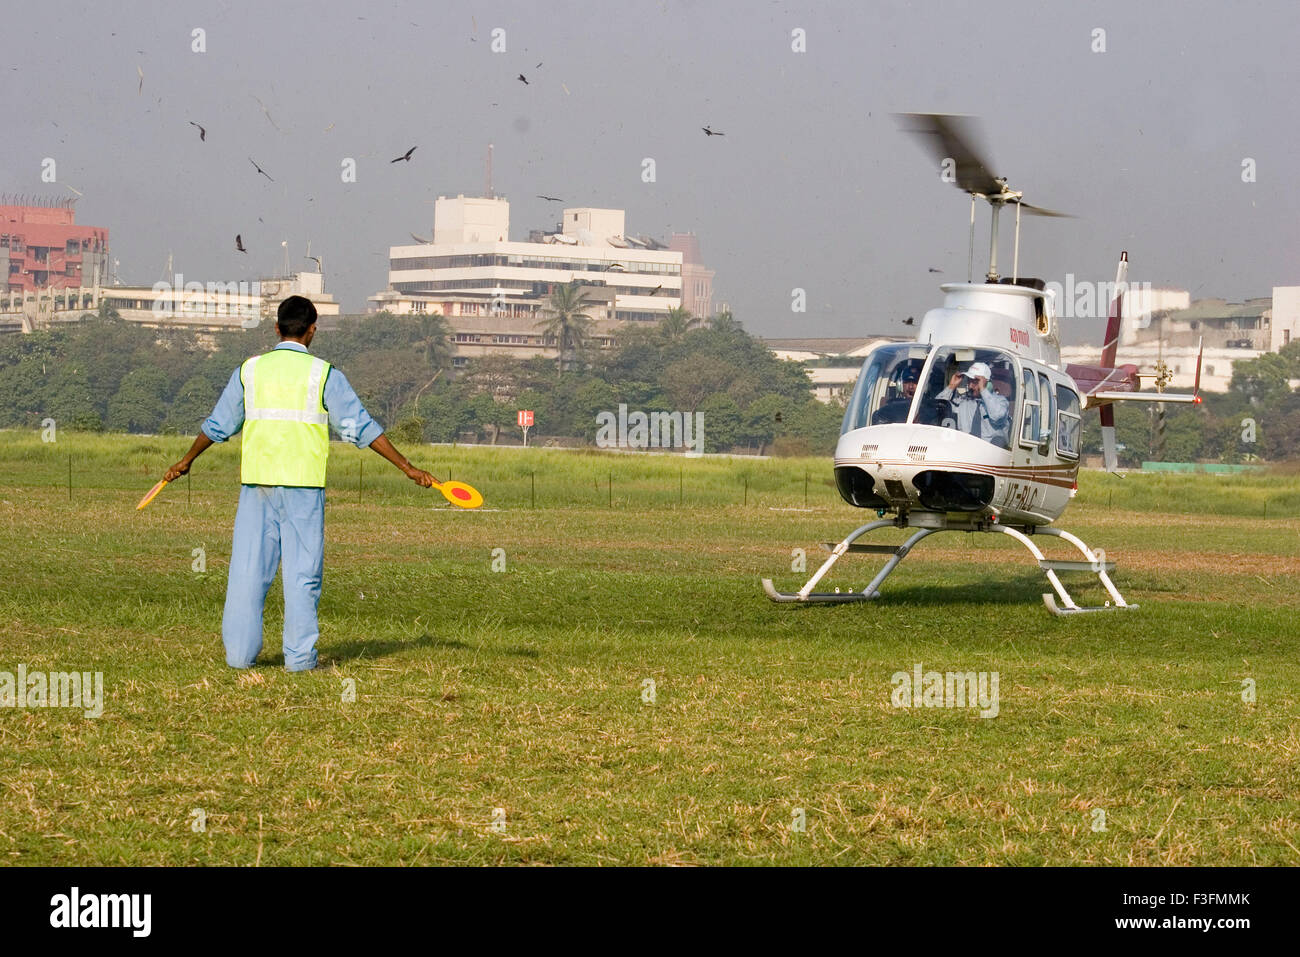 Air transport ; man giving direction for landing Helicopter Stock Photo